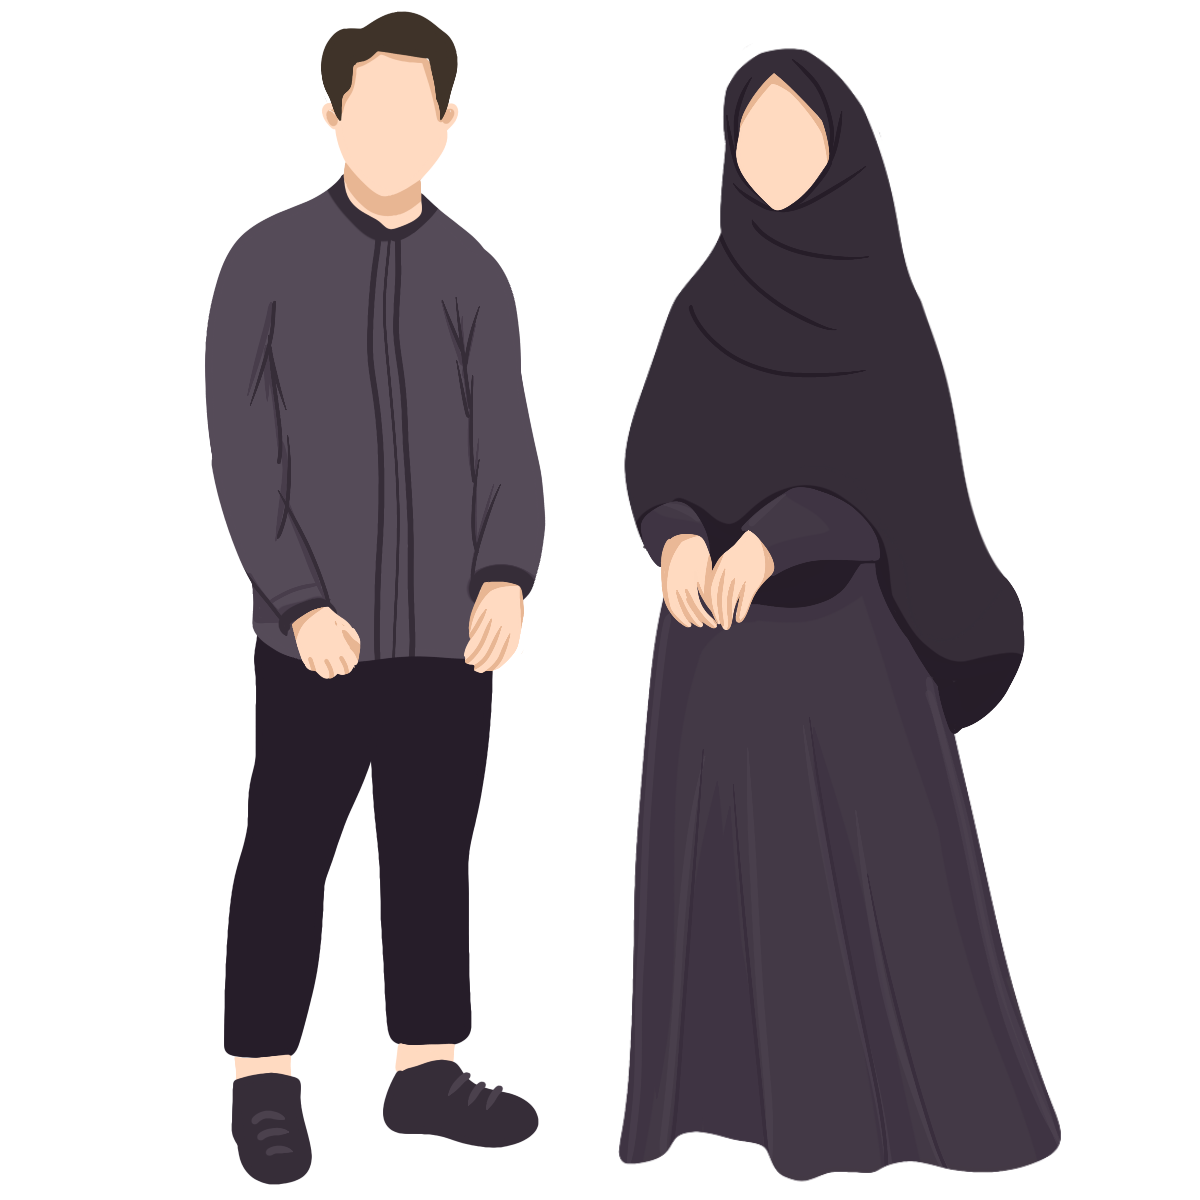 Pngtree—muslim-couple_6402399-2.png